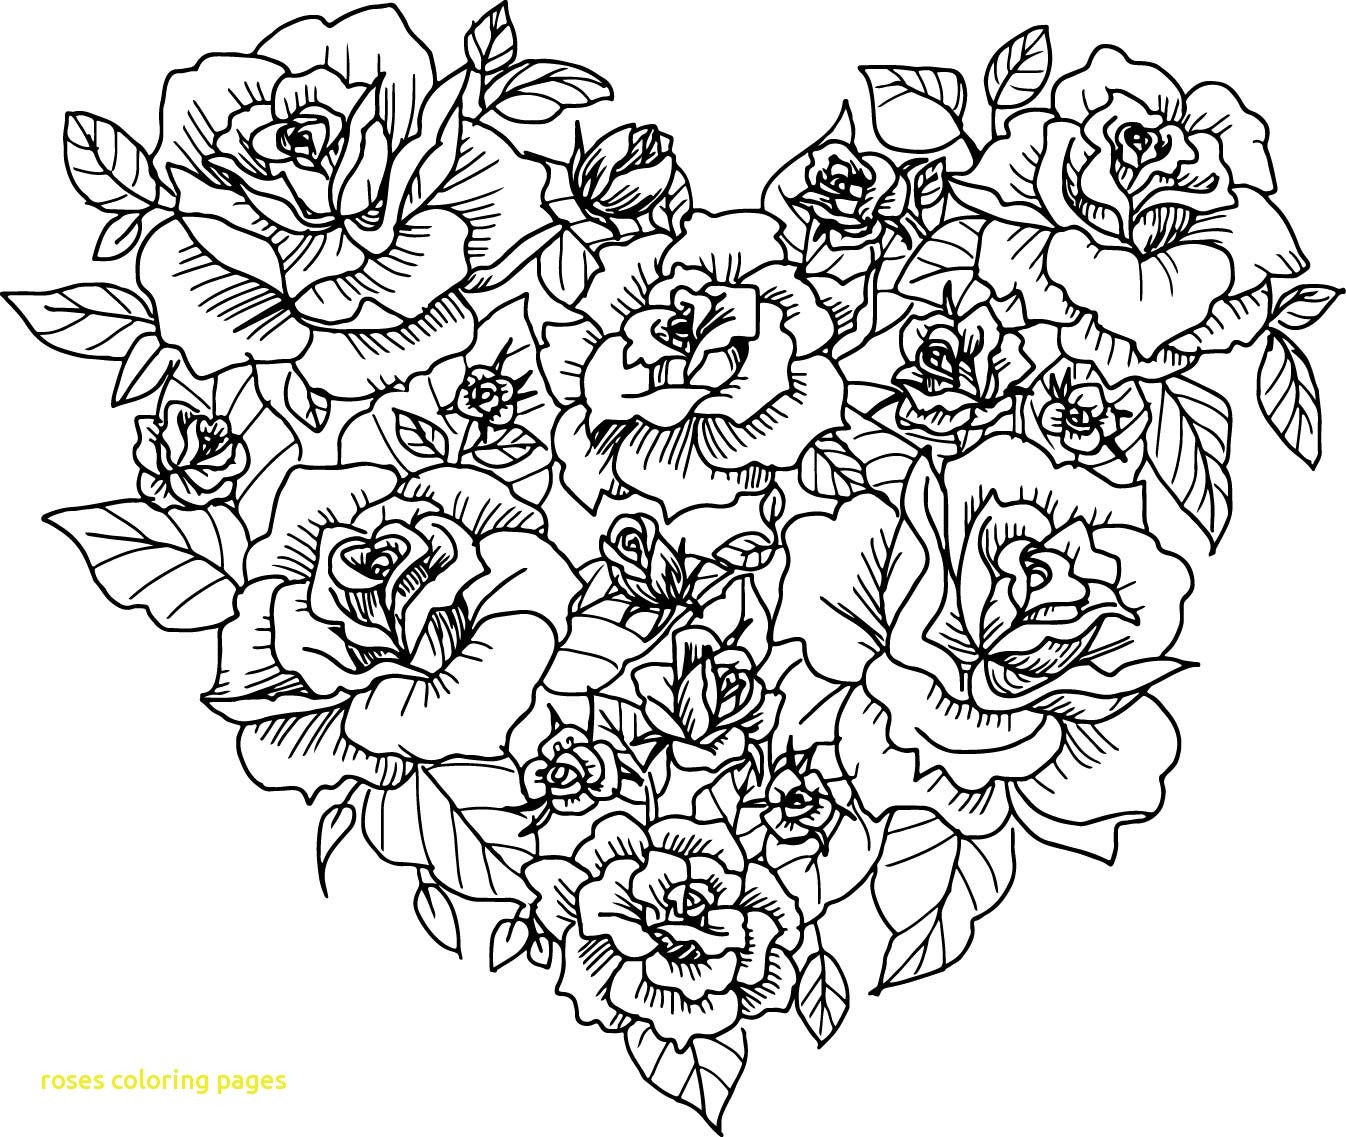 Roses And Hearts Coloring Pages Coloring Coloring Pages Of Hearts And Flowers Awesome With Roses